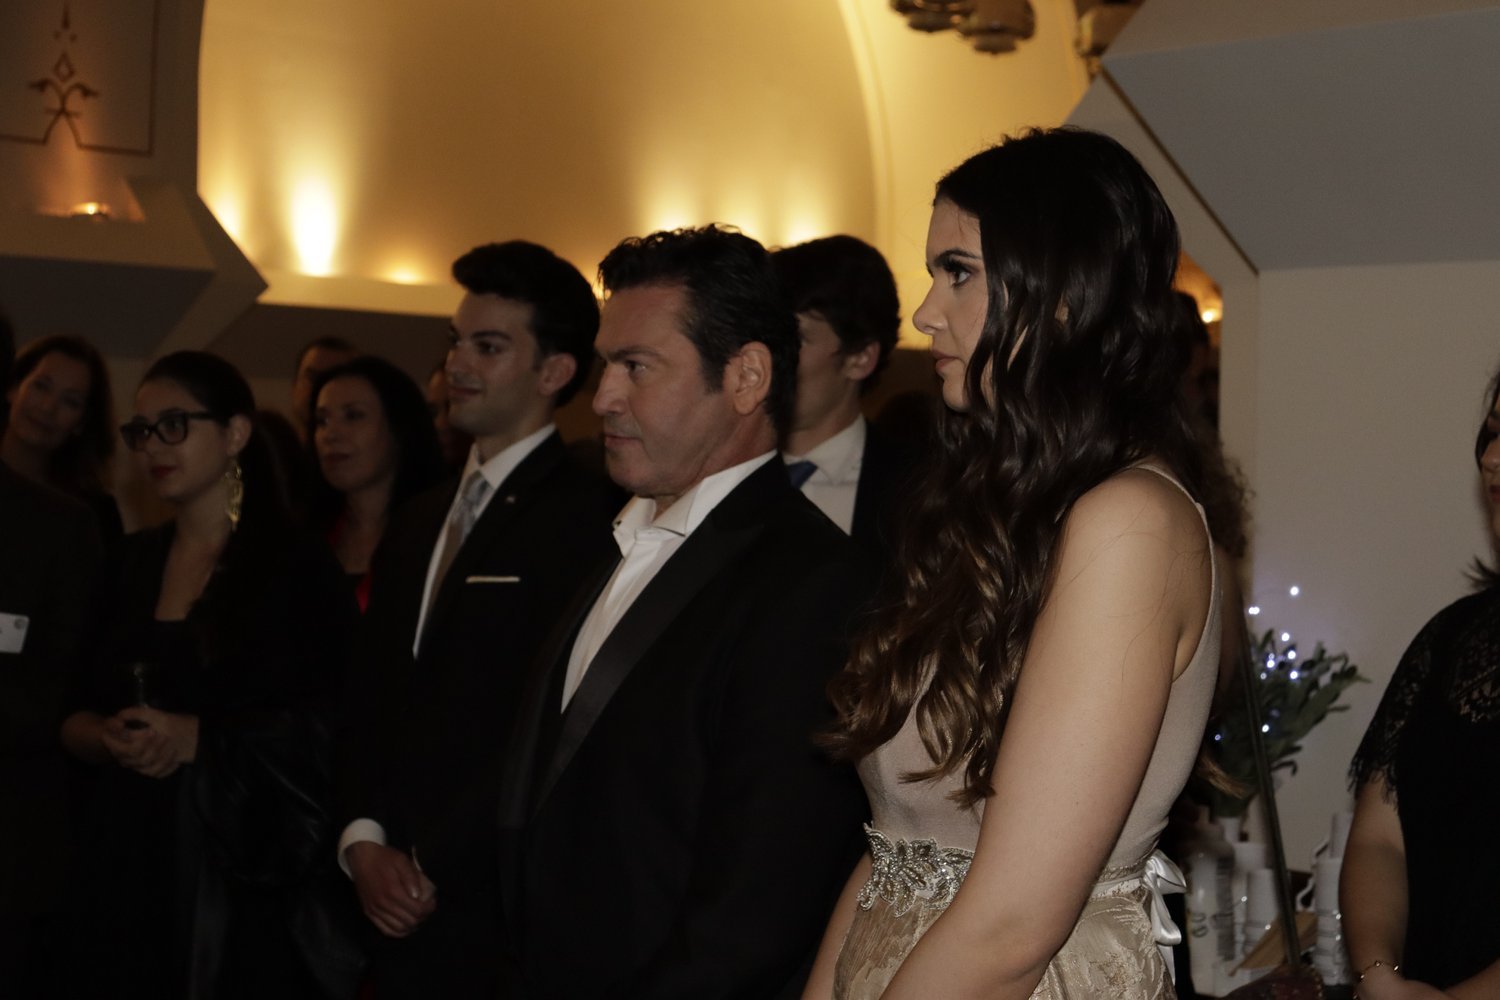  Mario Frangoulis and Theresa Carlomagno during the Concert afterparty. 